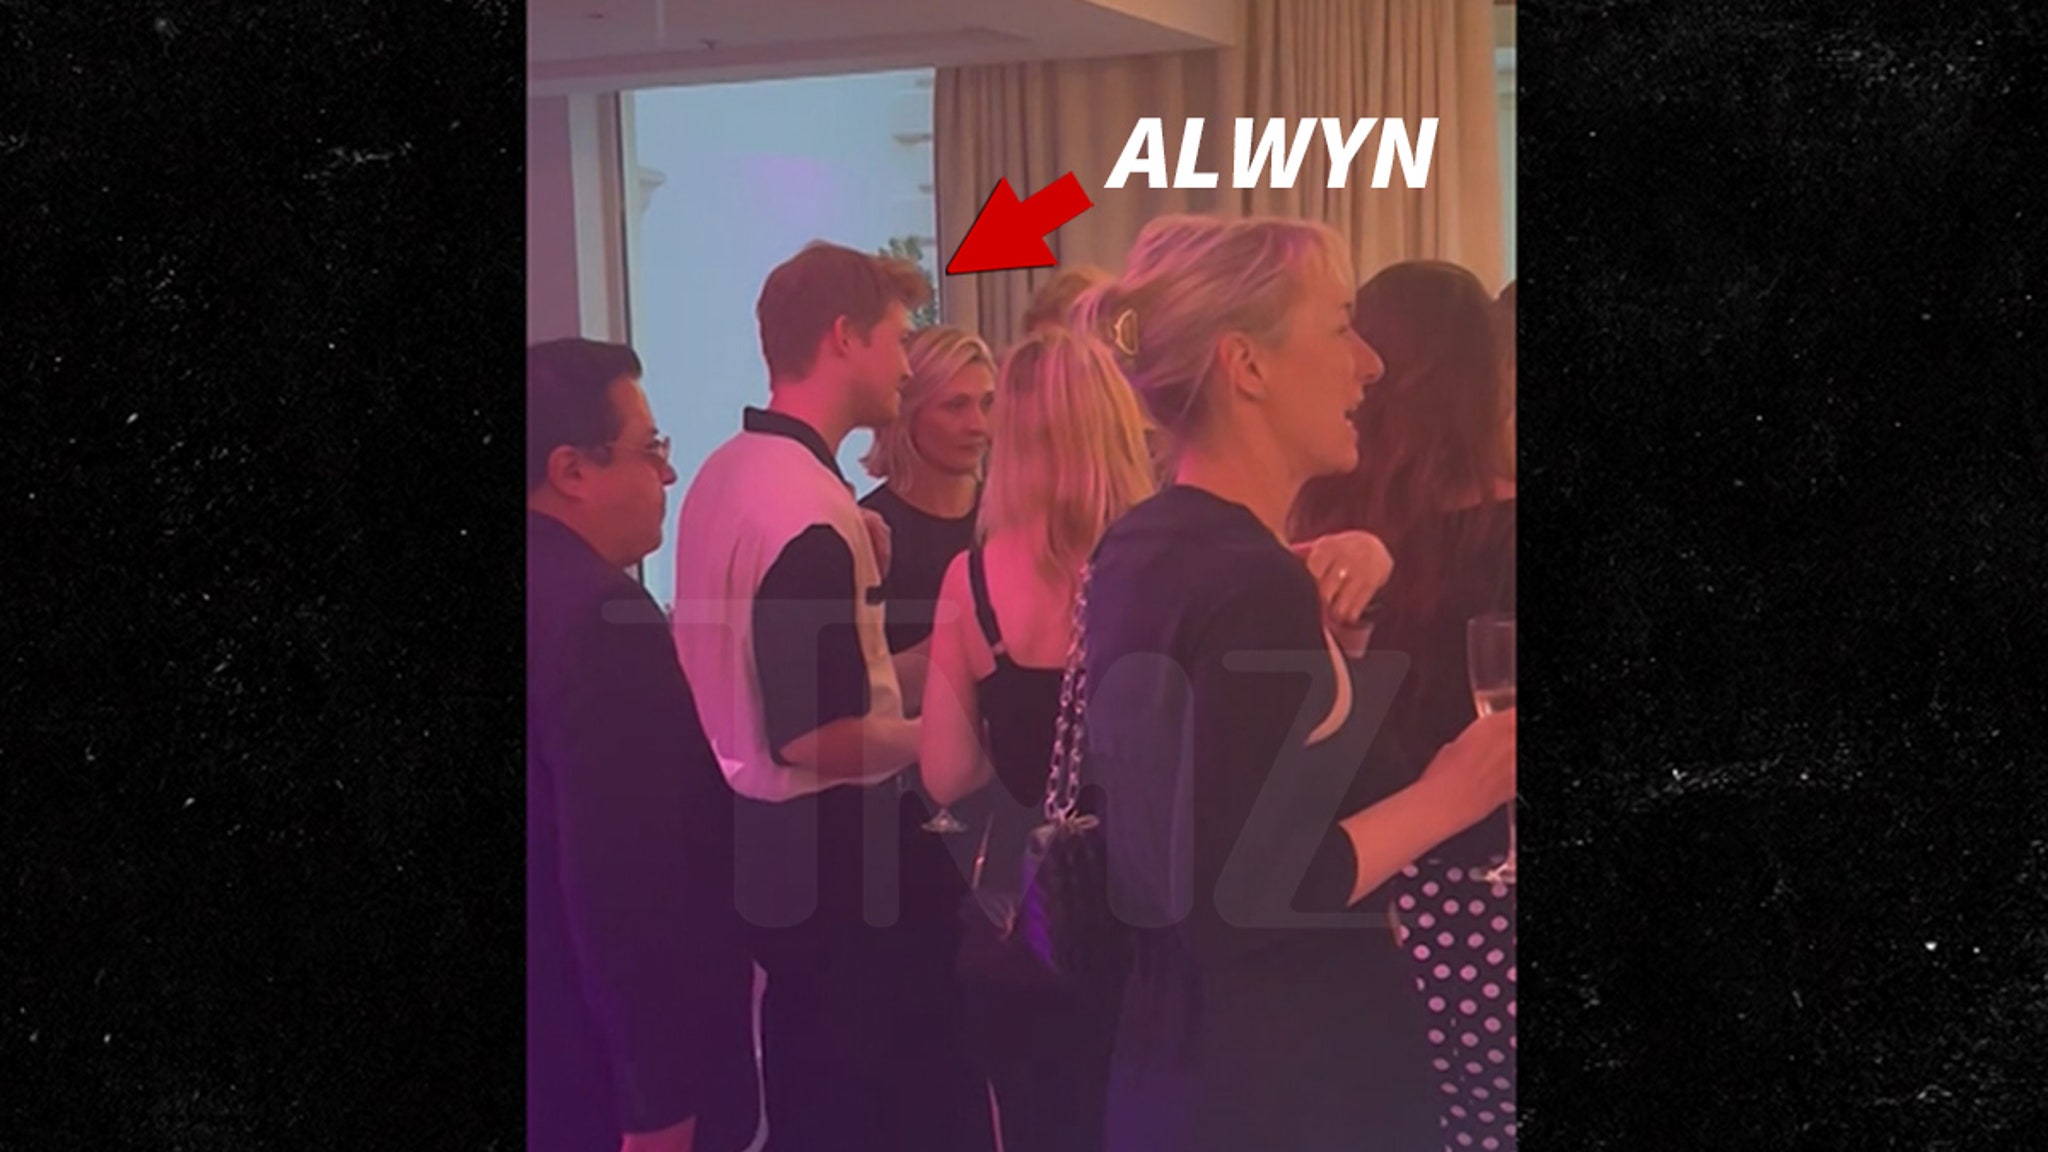 Taylor Swift’s Ex Joe Alwyn Chats Up Group of Blondes at Cannes